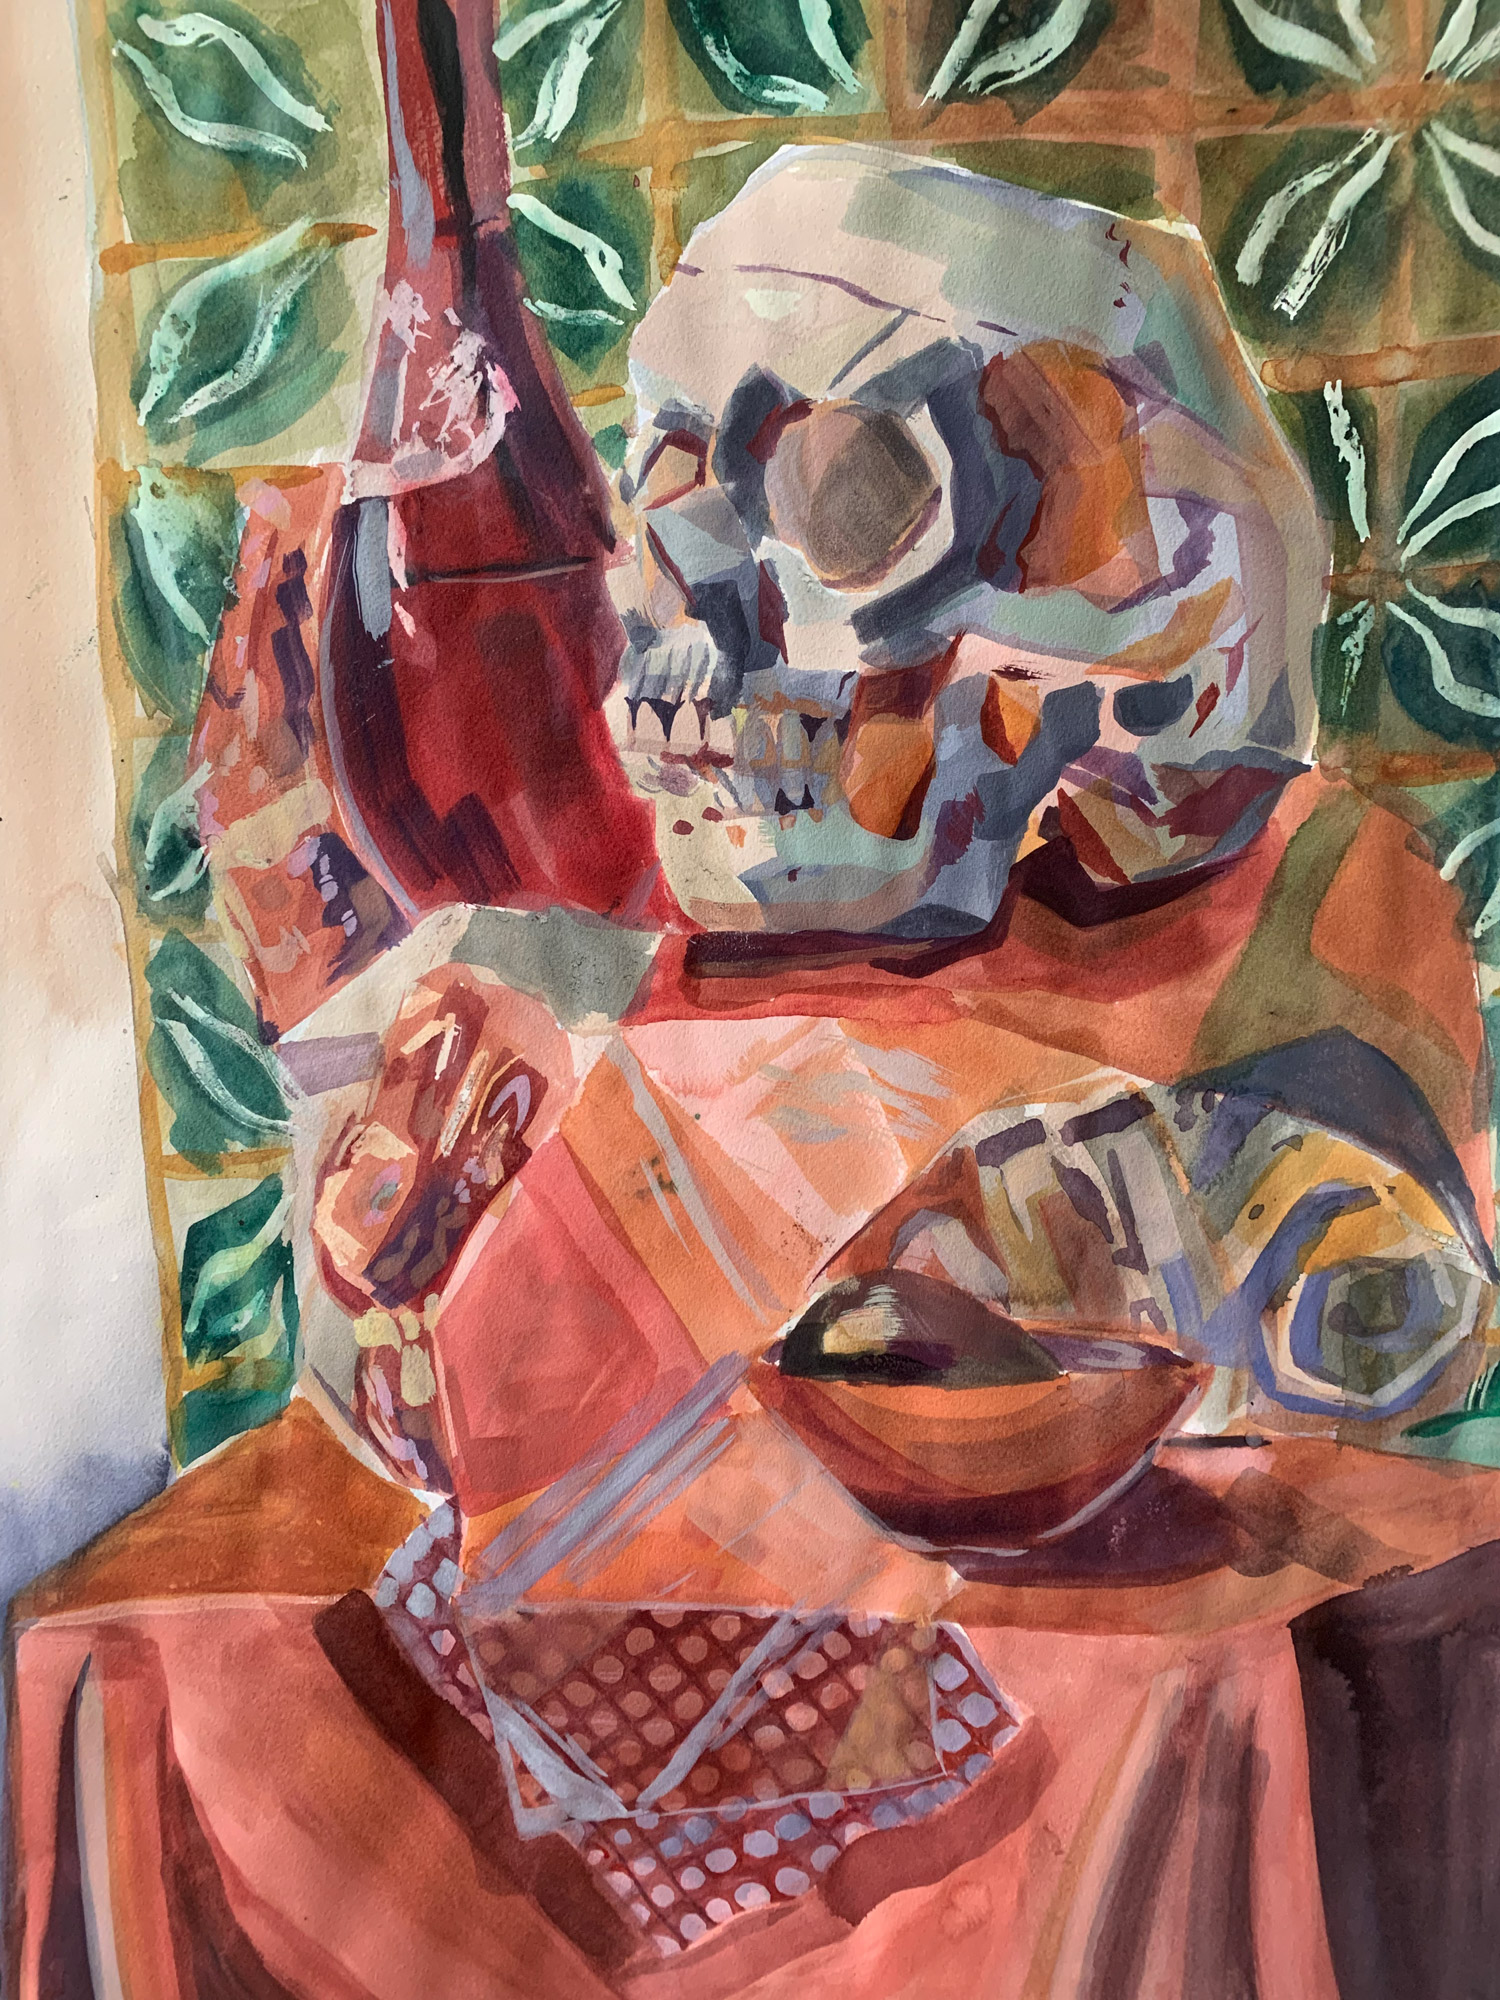 Still life painting with a skull and bowl on a table